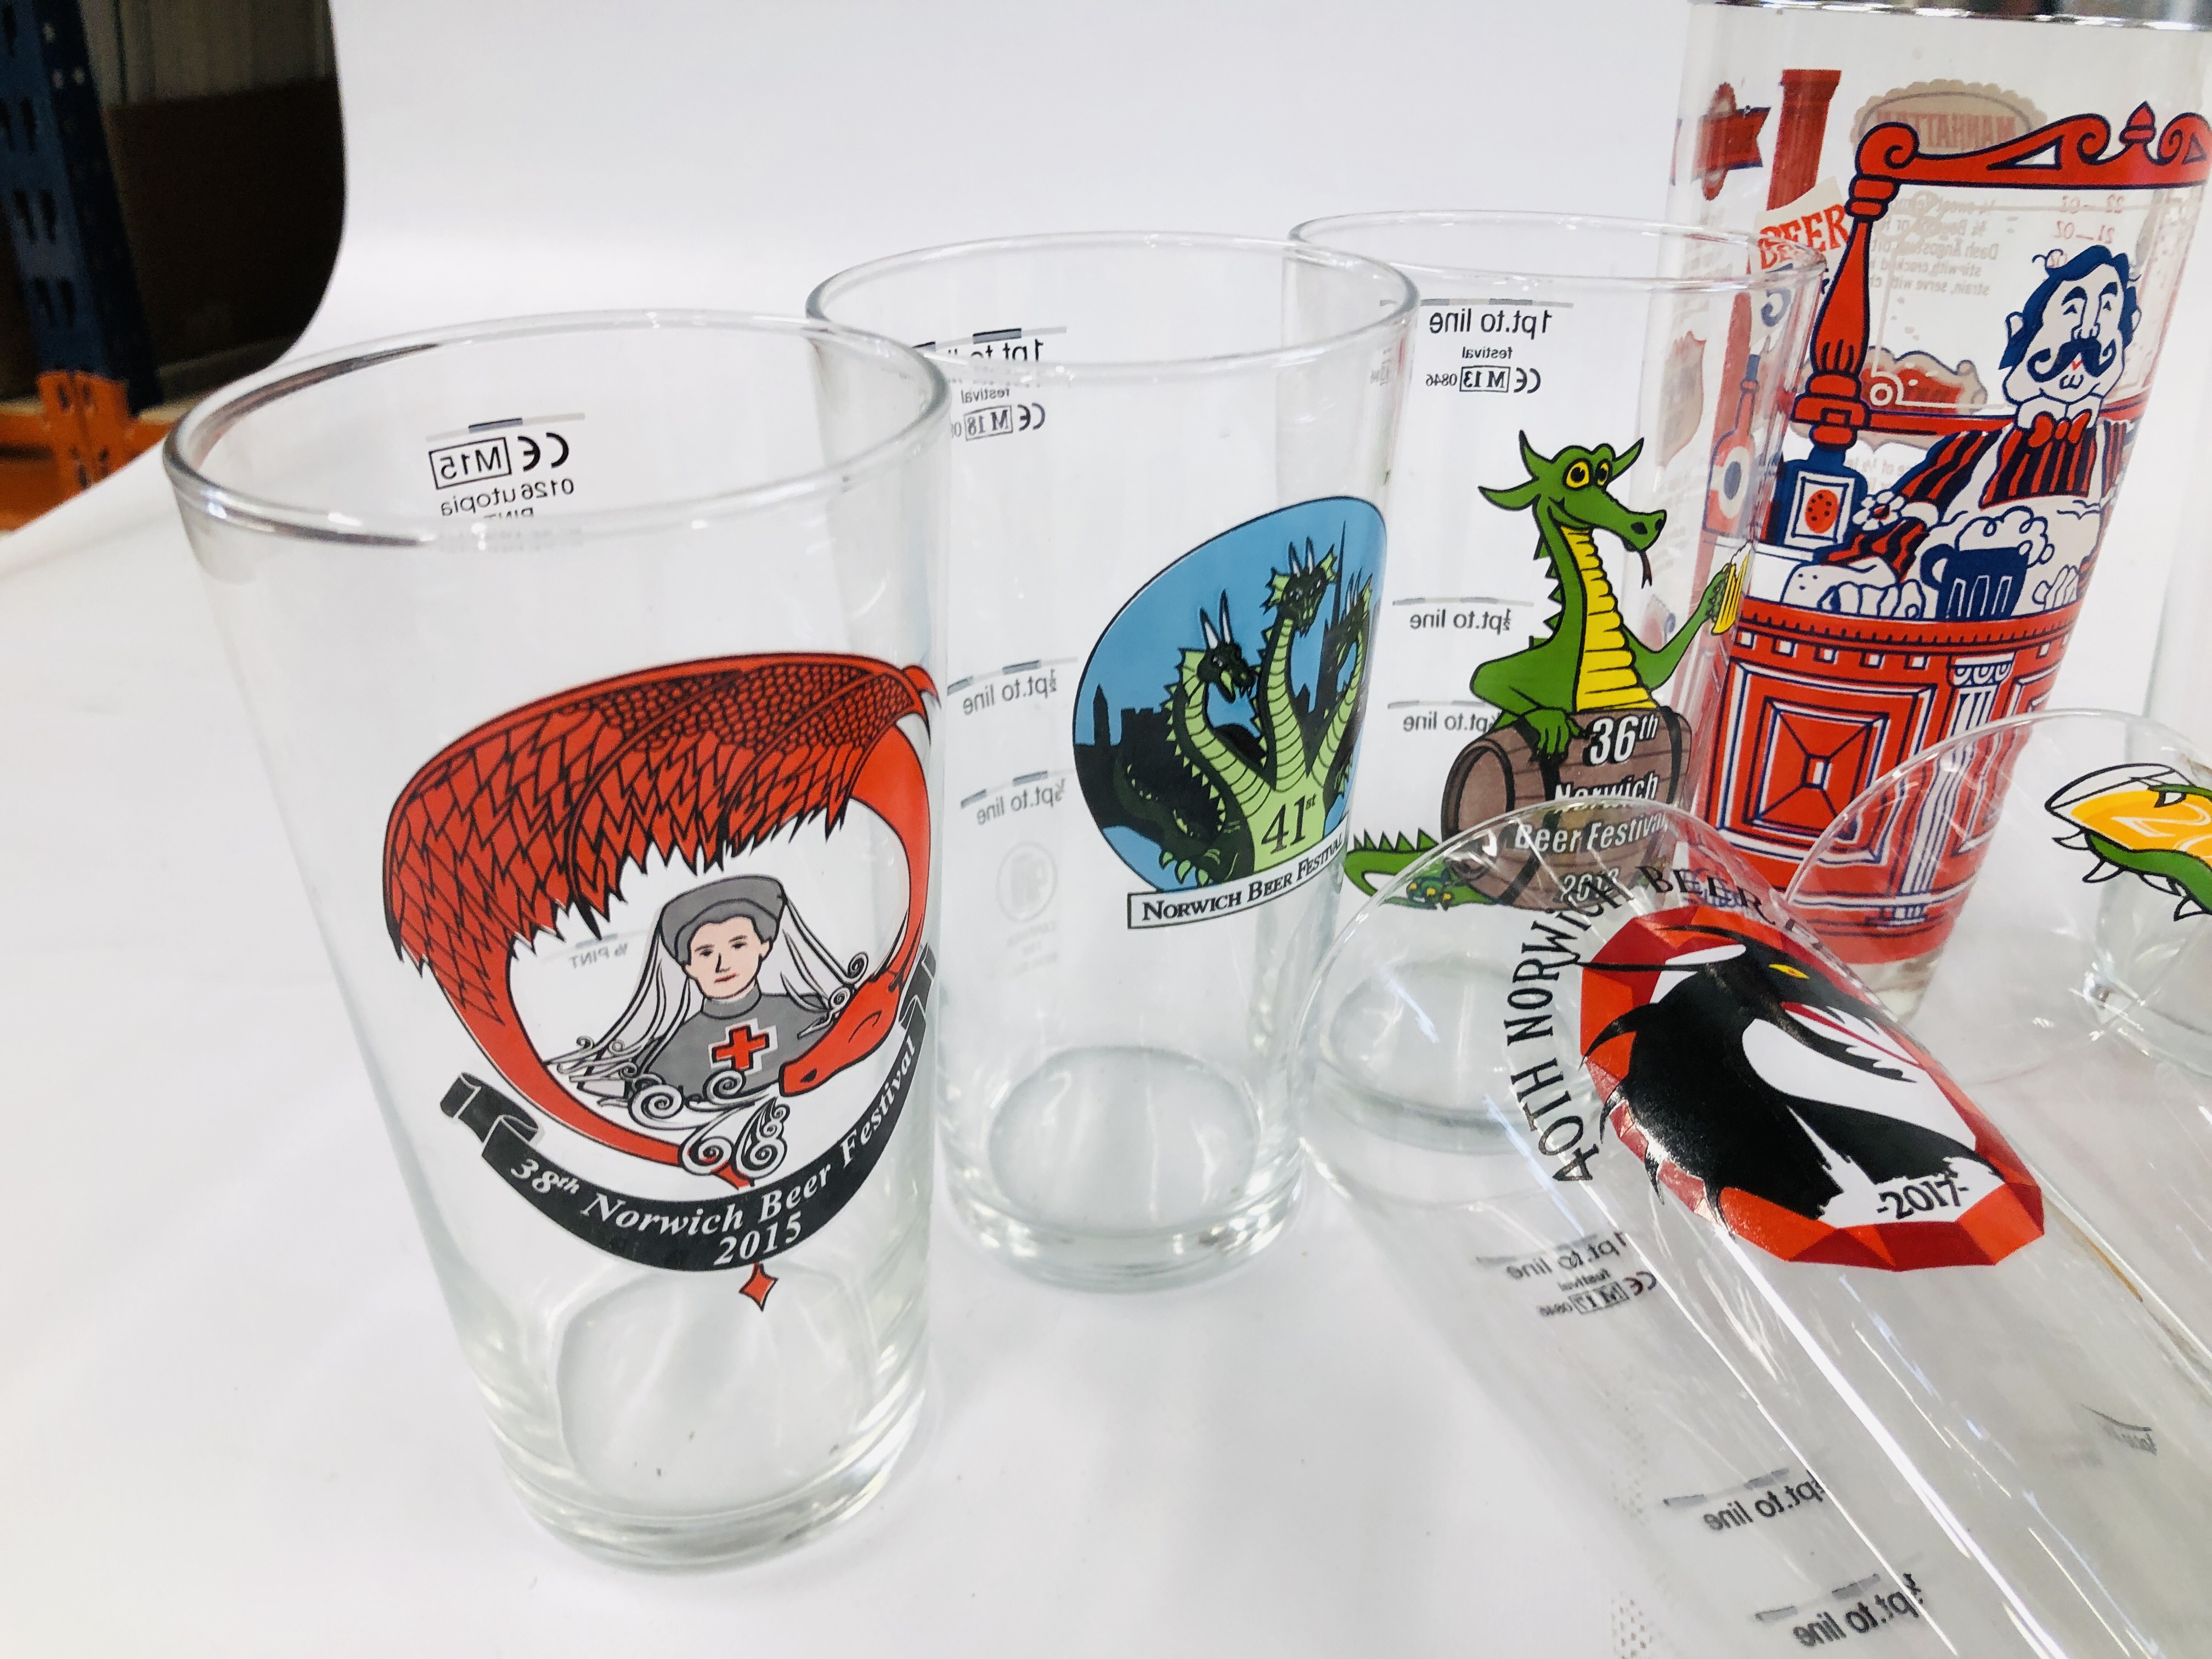 A COLLECTION OF 13 NORWICH BEER FESTIVAL GLASSES ALONG WITH A VINTAGE BOXED SET "BAR BELLES - Image 2 of 7